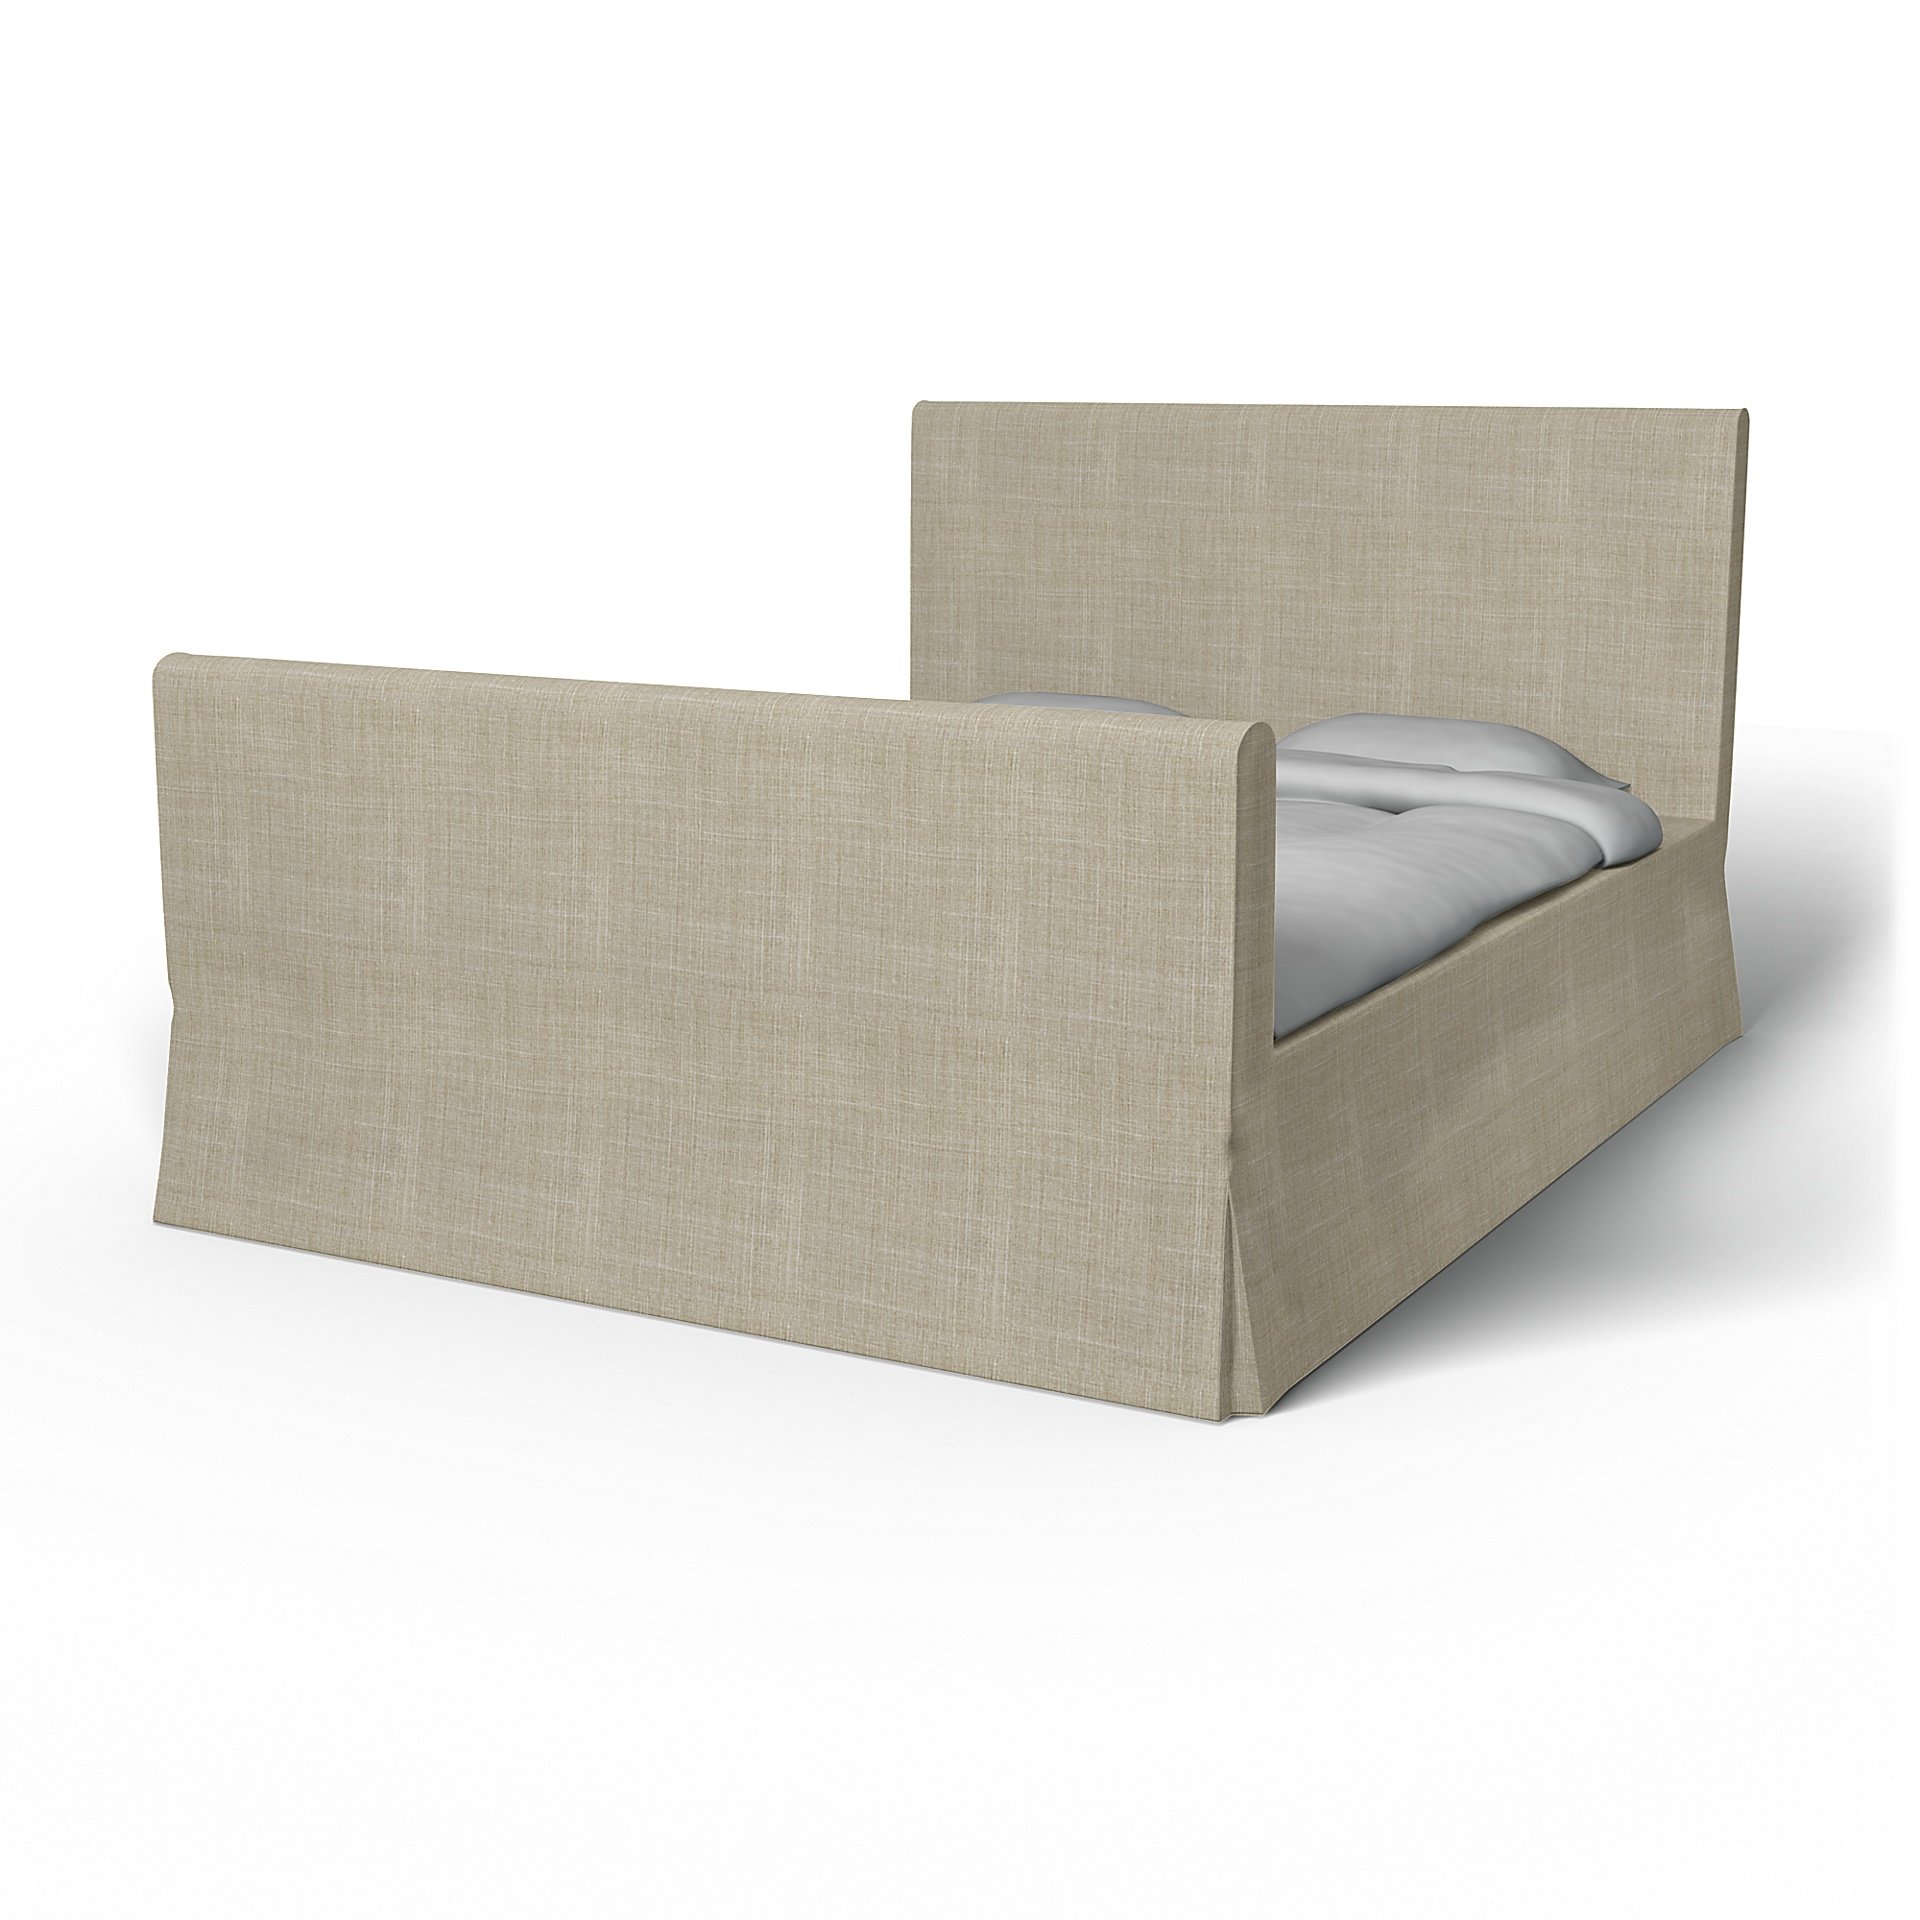 IKEA - Floro Bed Frame Cover, Sand Beige, Boucle & Texture - Bemz